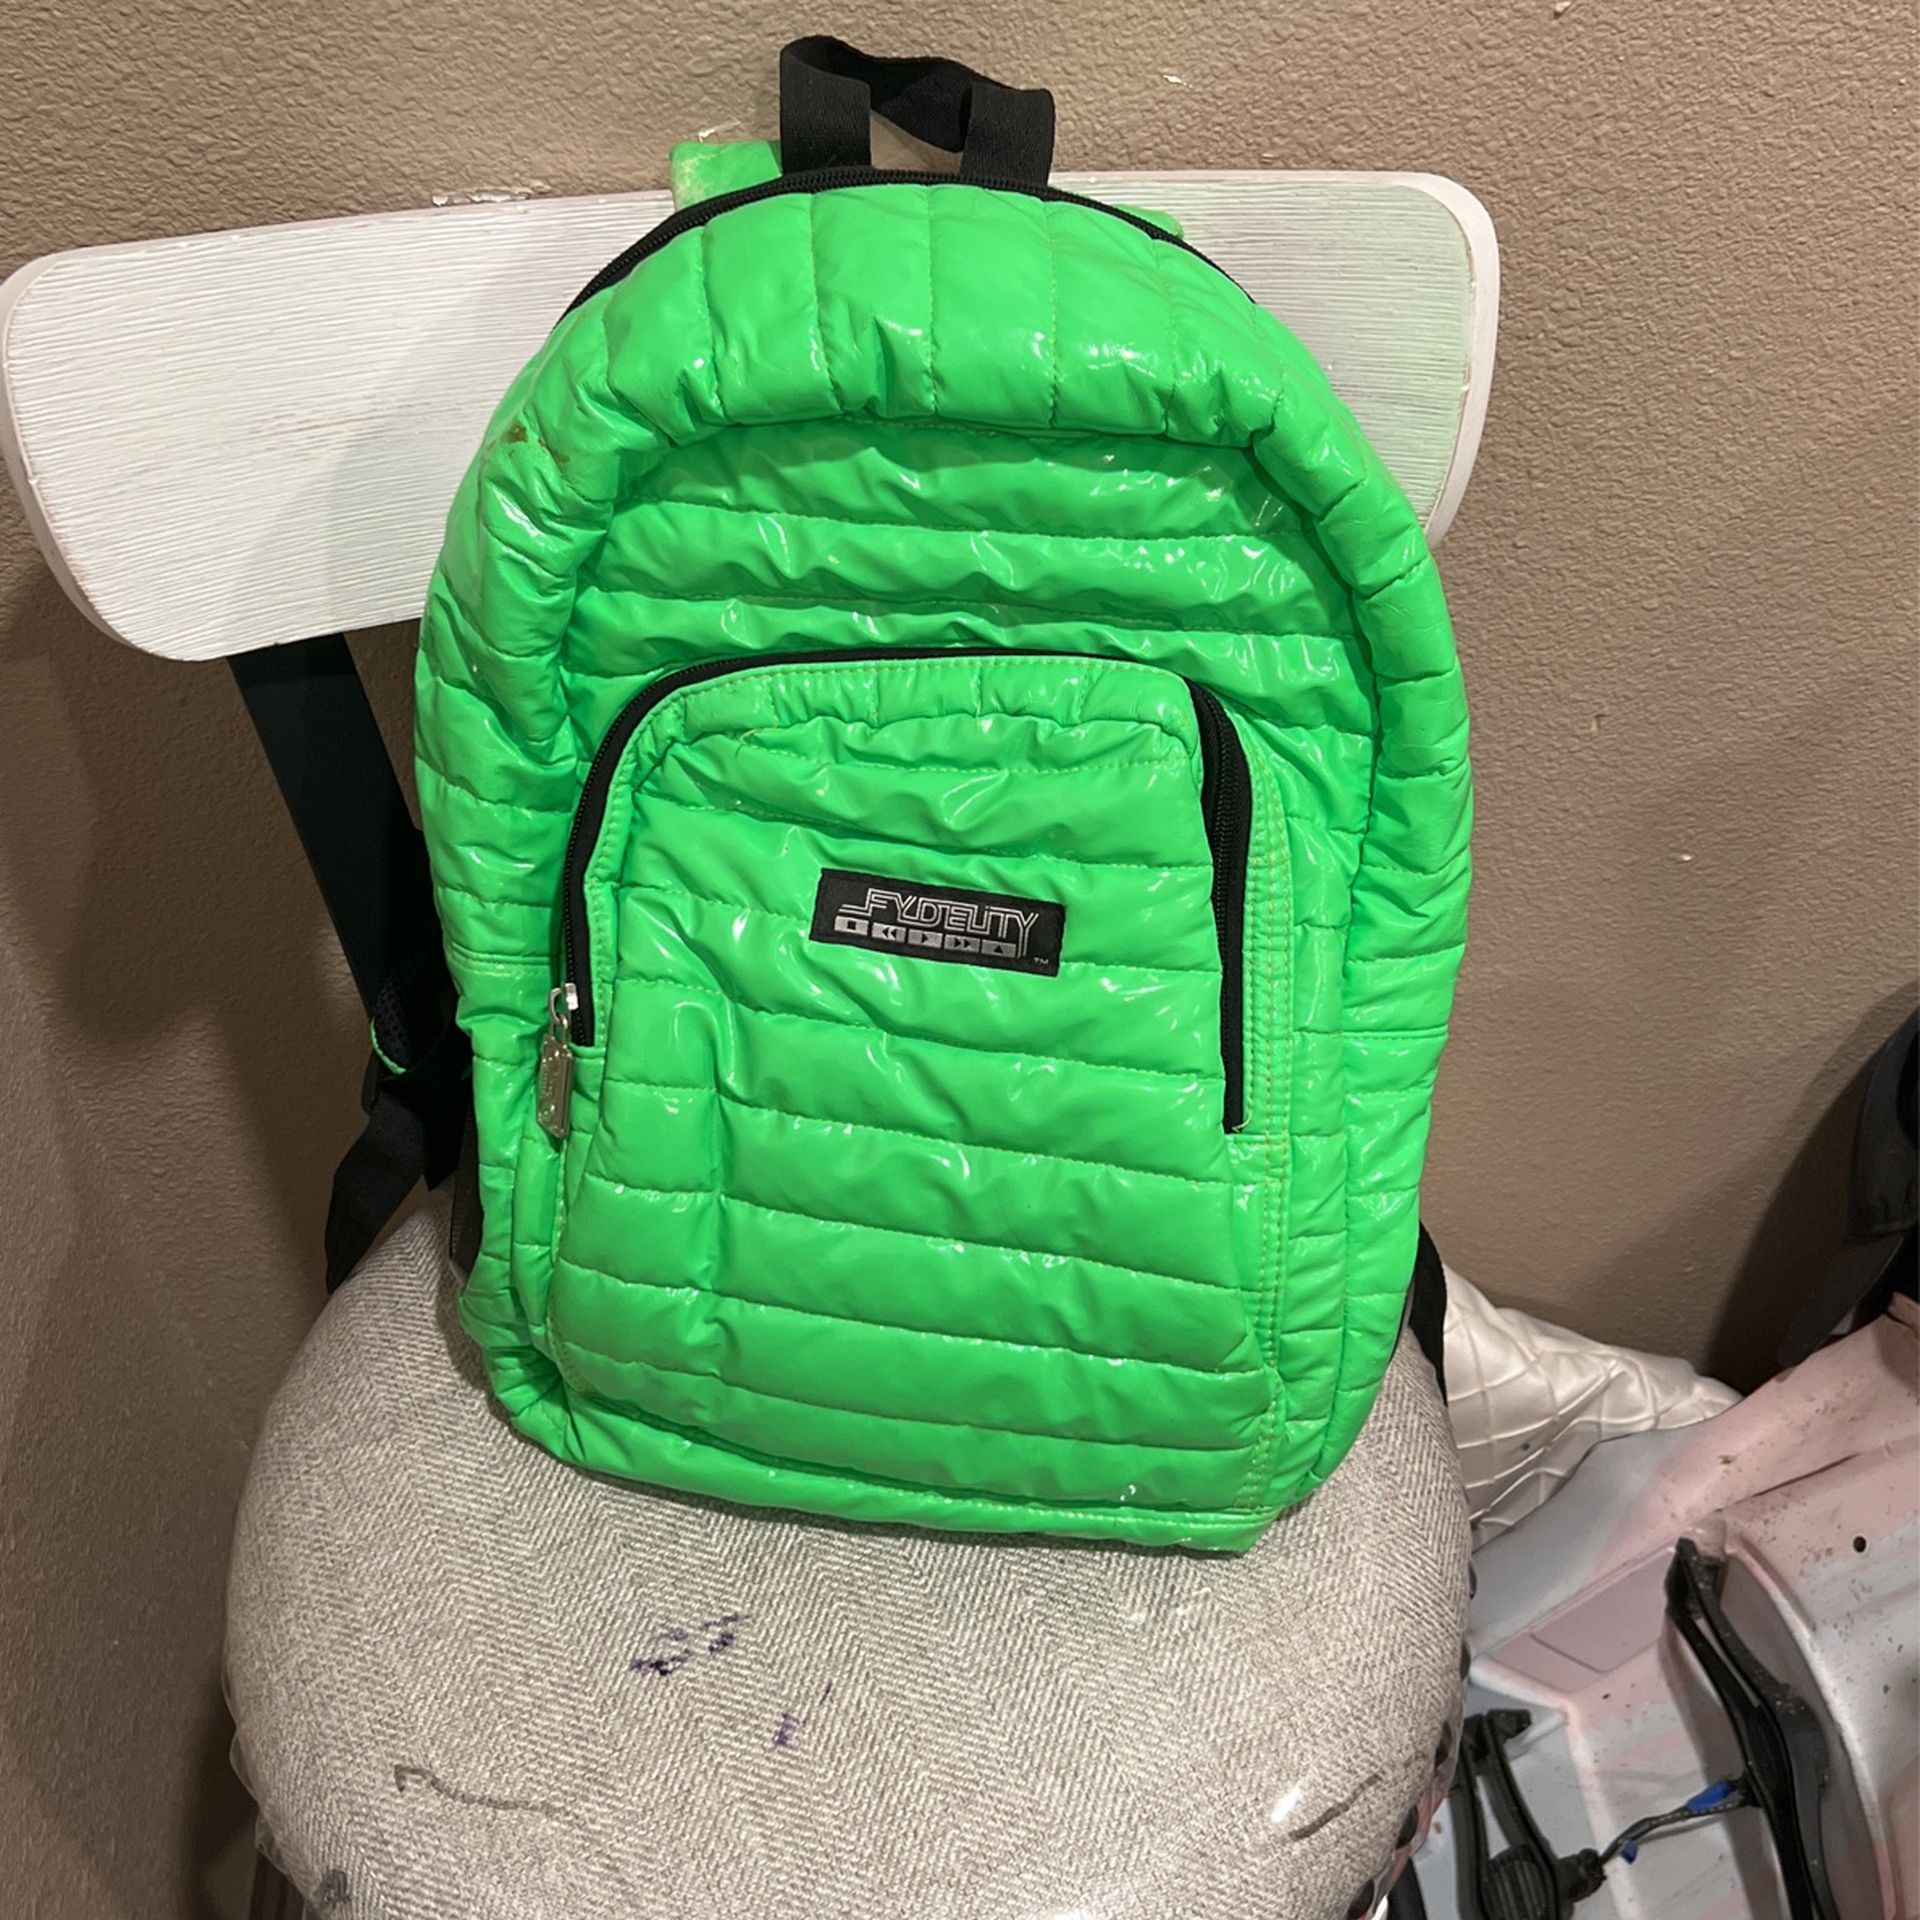 Backpack With Speakers!